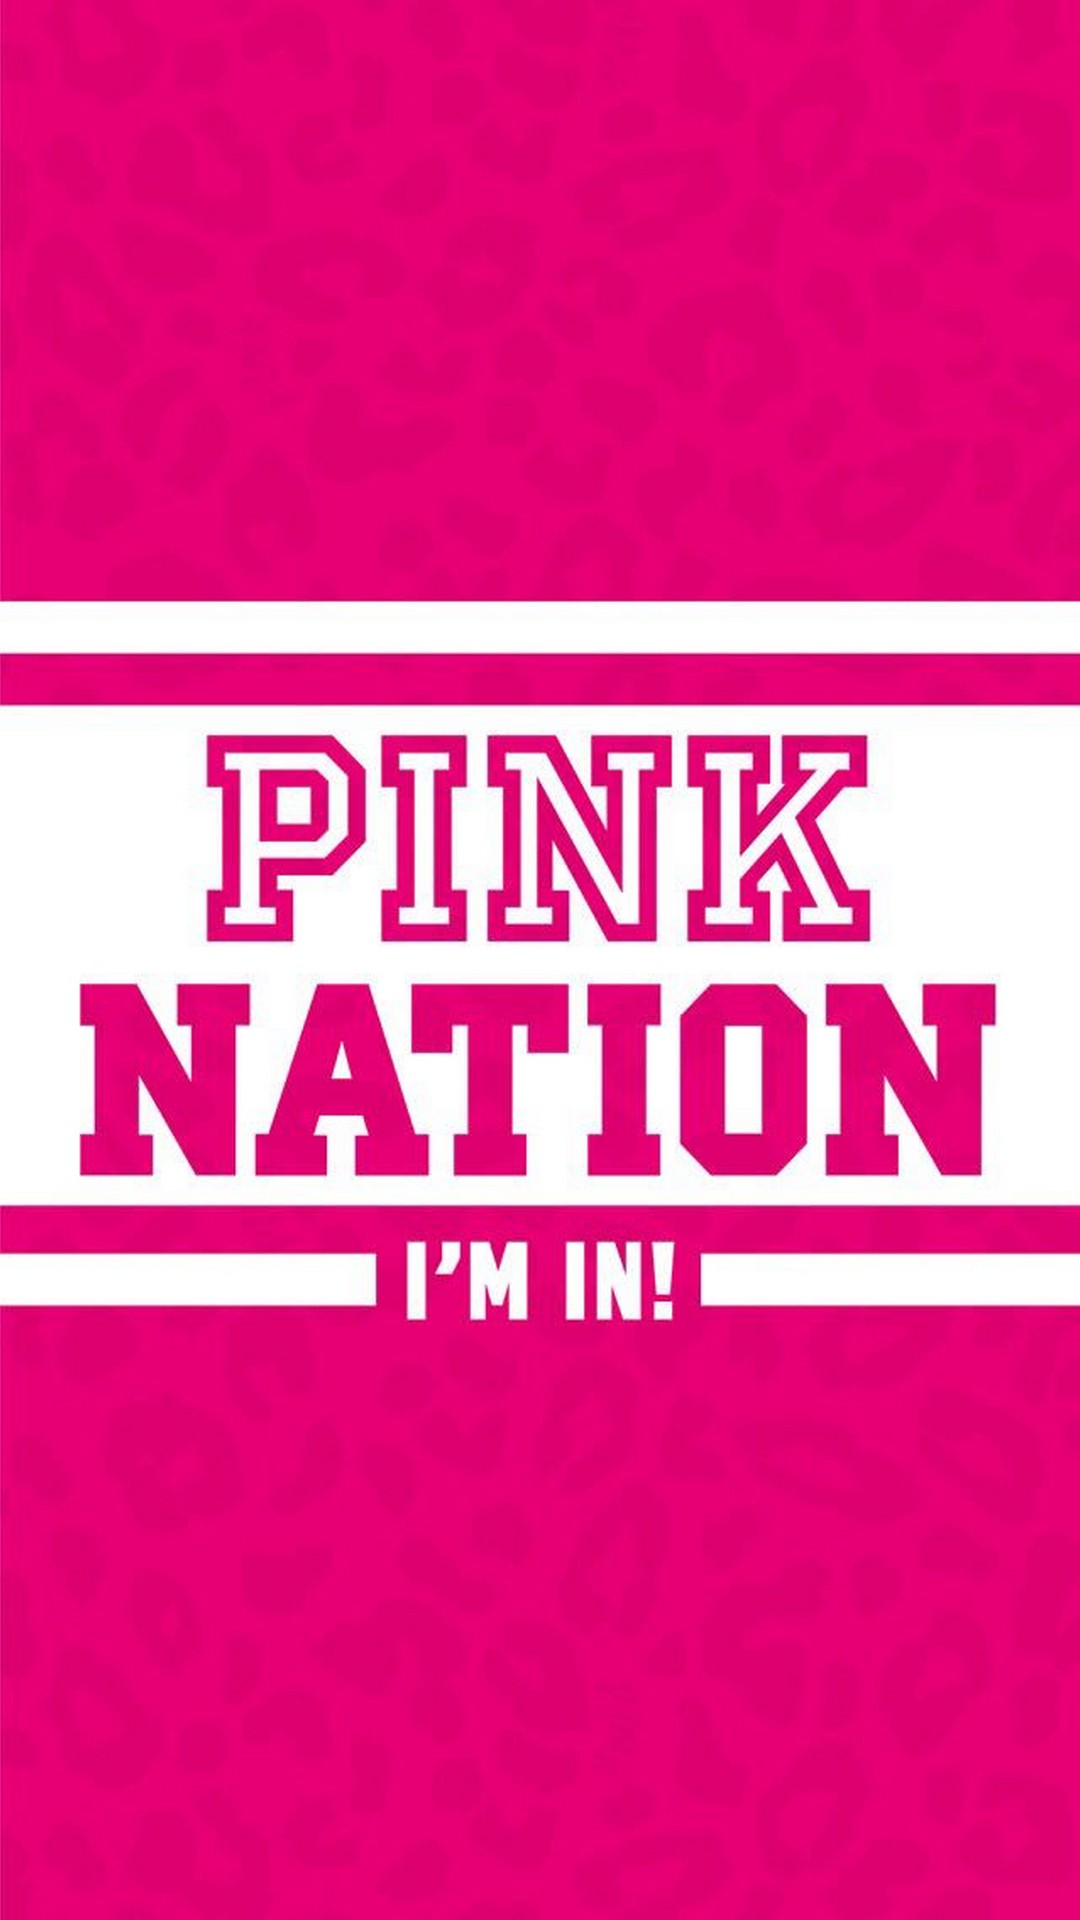 Pink Nation Wallpaper For Mobile 1080x1920